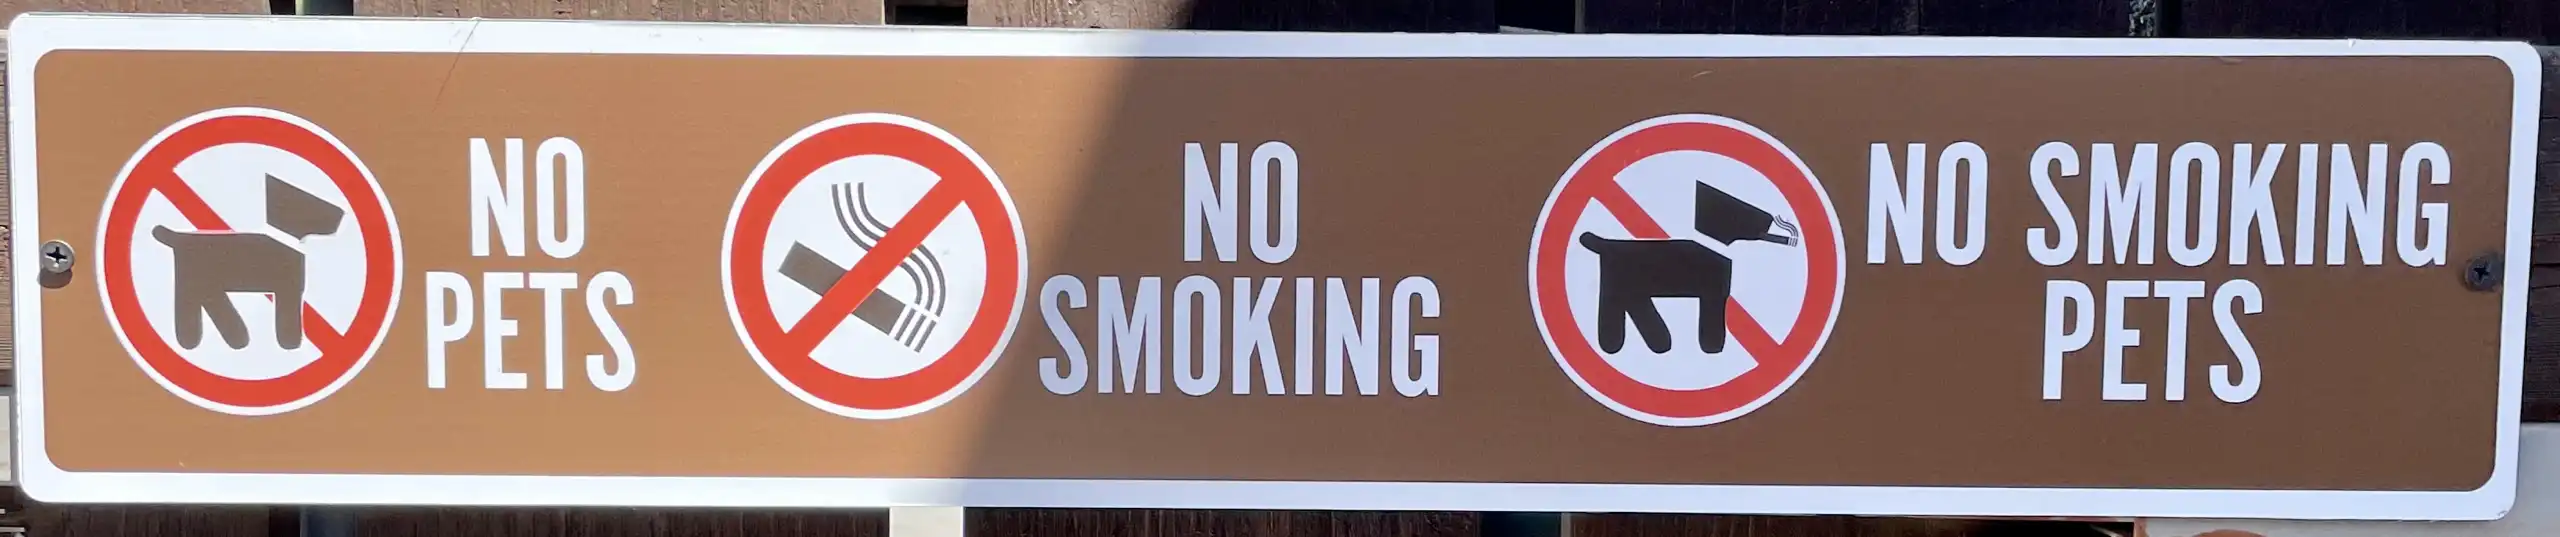 Sign at the Hidden Tap saying 'No Pets, No Smoking, No Smoking Pets' with appropriate icons.